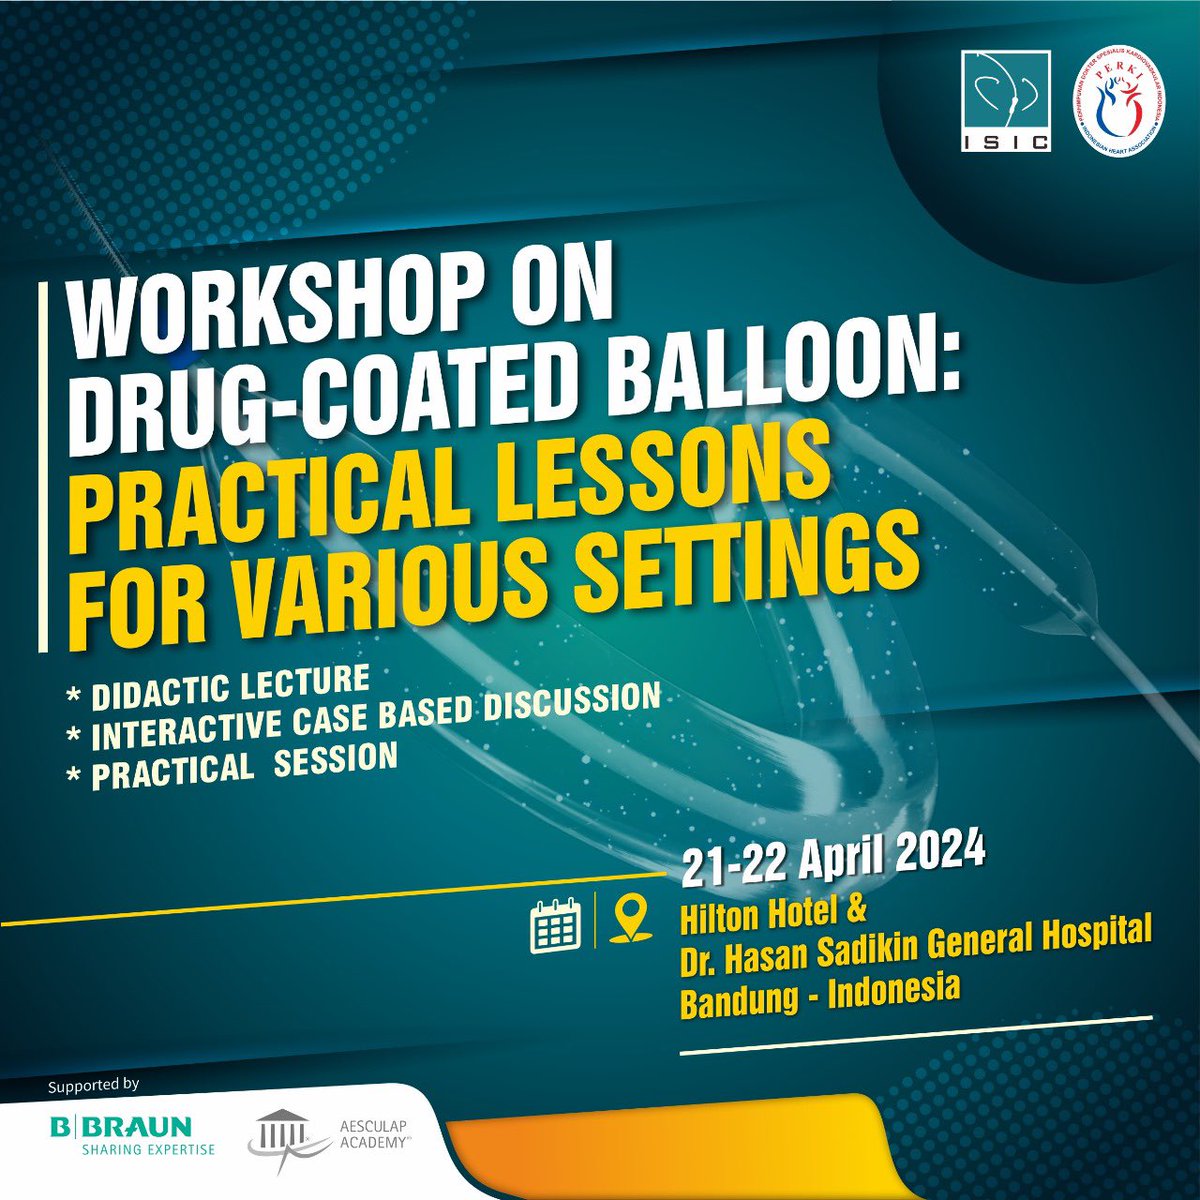 🎉 ISIC's Drug Coated Balloon Workshop will be held on April 21-22, 2024! Dive into theoretical & practical knowledge, incl. live cases experience to broaden participant’ perspective&skills! Dont miss the exciting update! @uziyahya46 @IndahSP_MD @APSIC6 @CRT_meeting @PCRonline